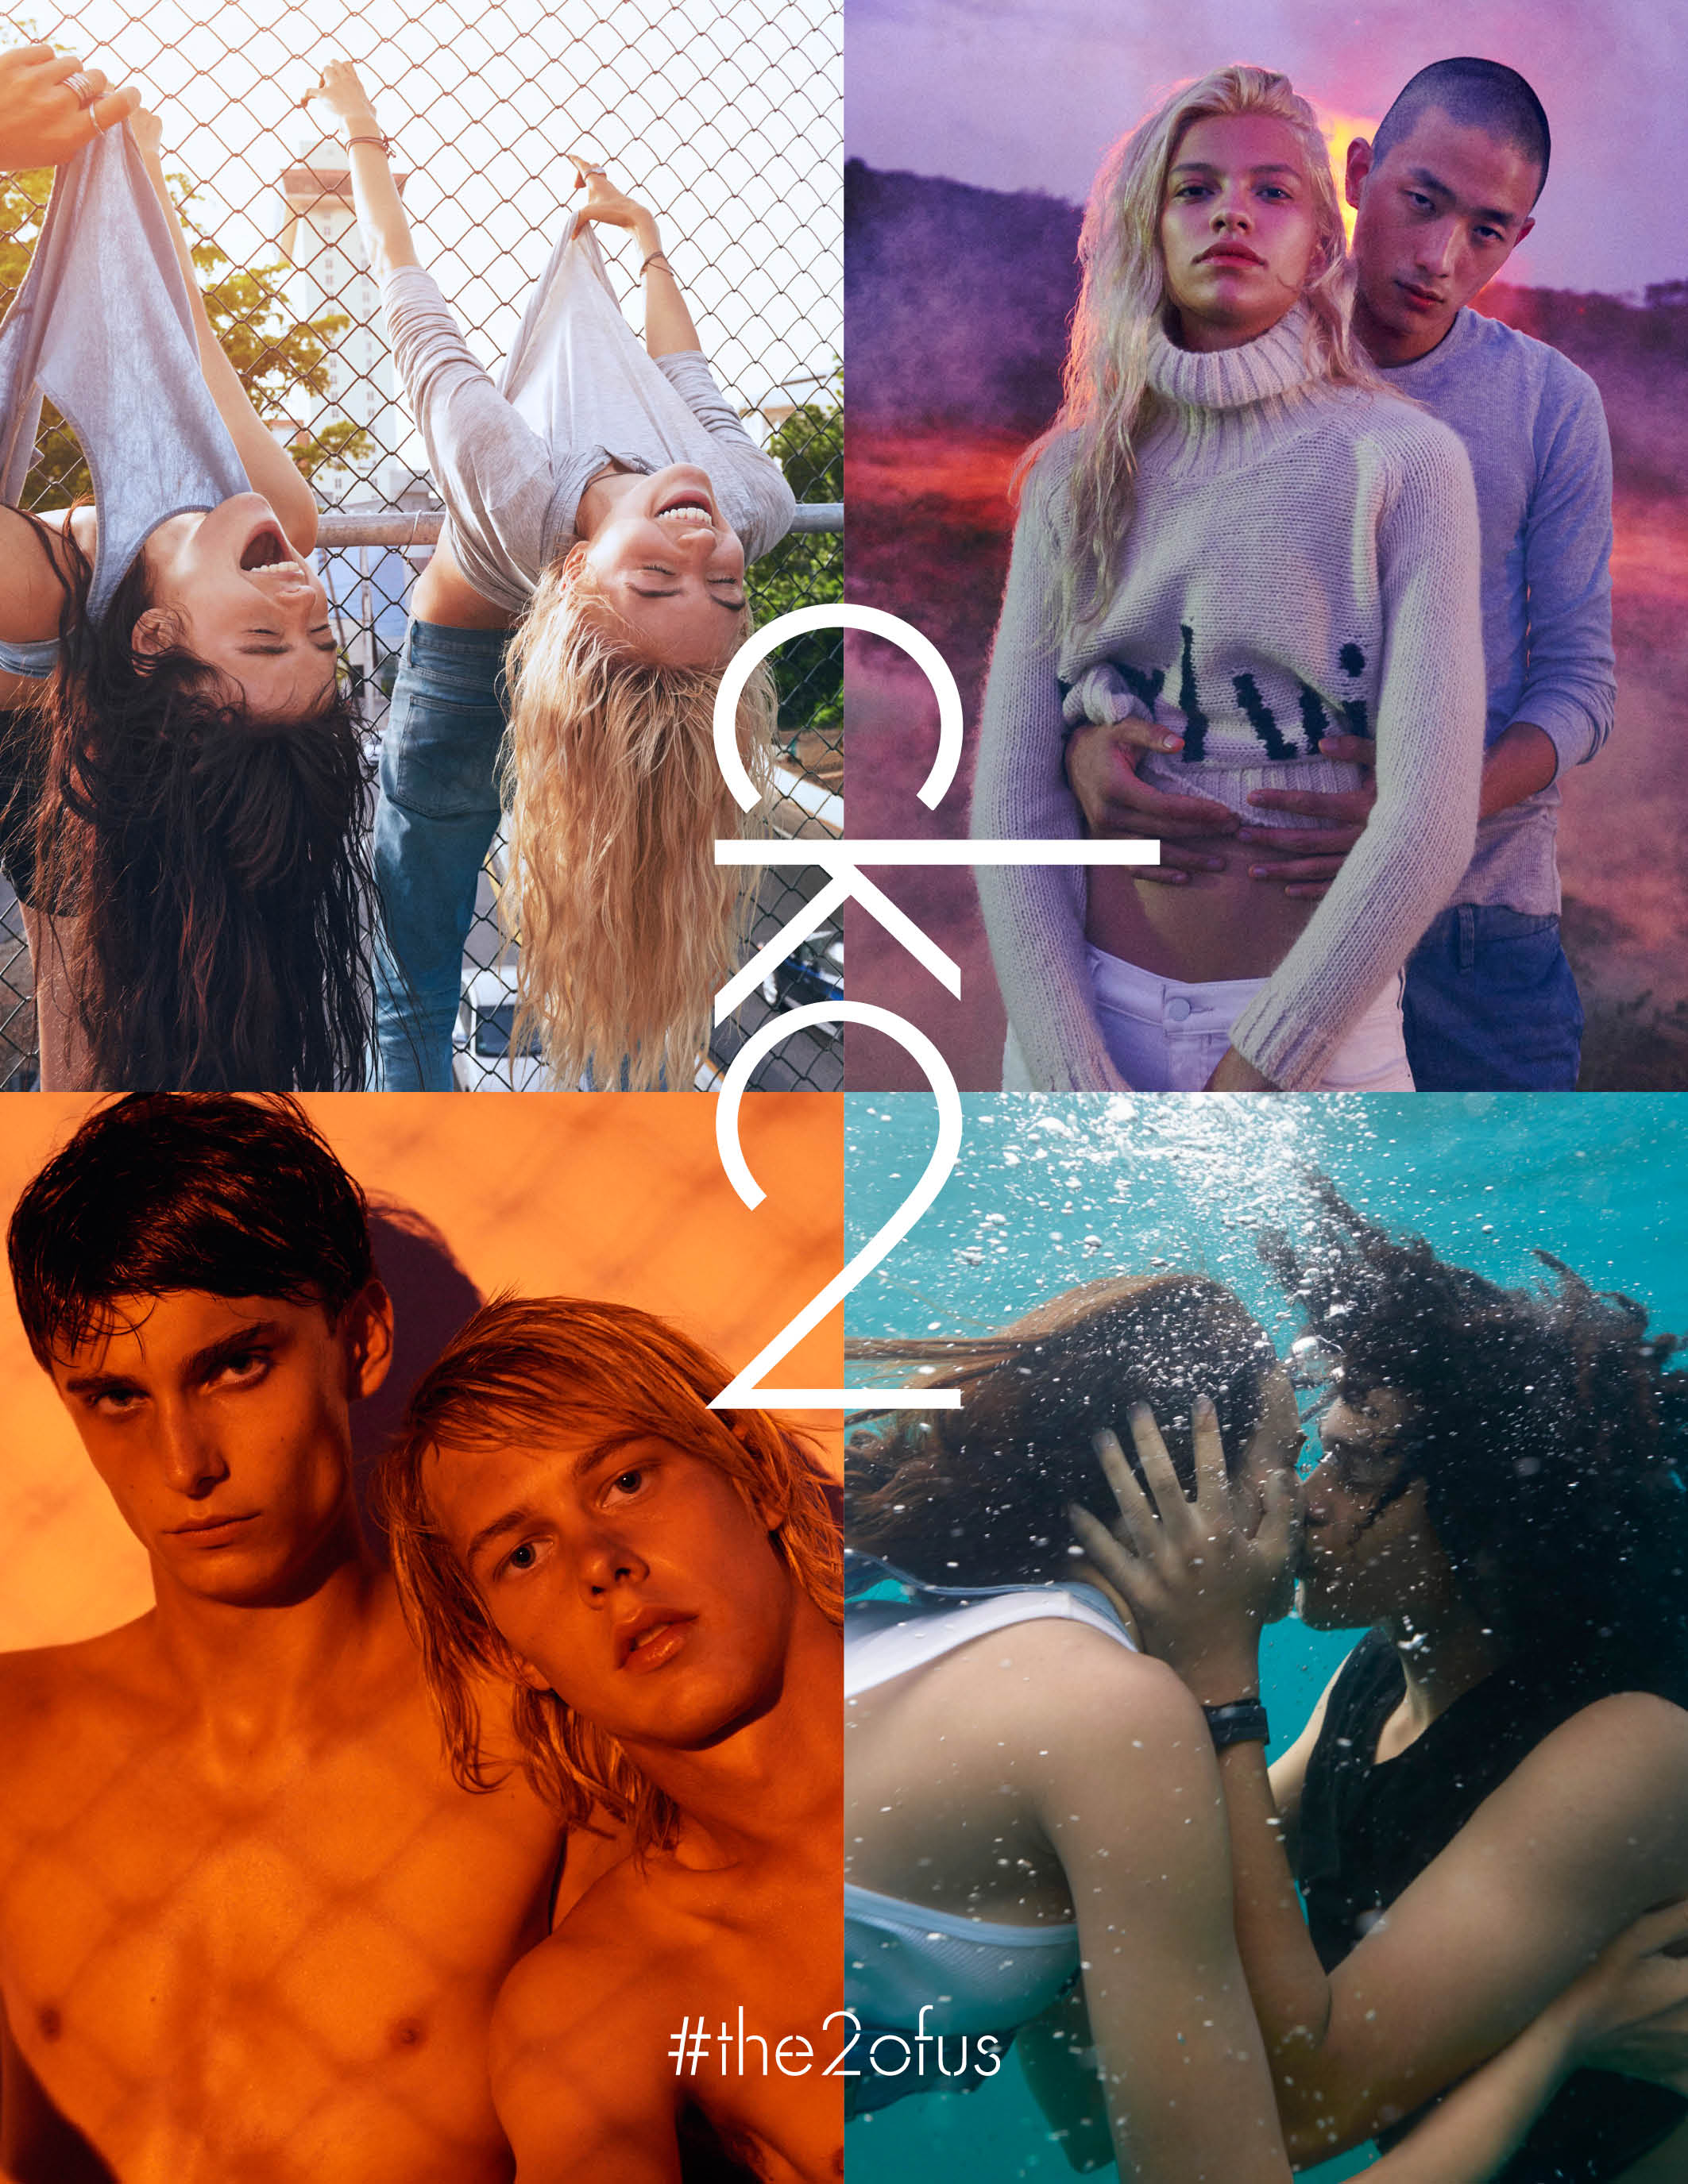  ck2 x calvin klein - a new scent for #the2ofus by calvin klein 